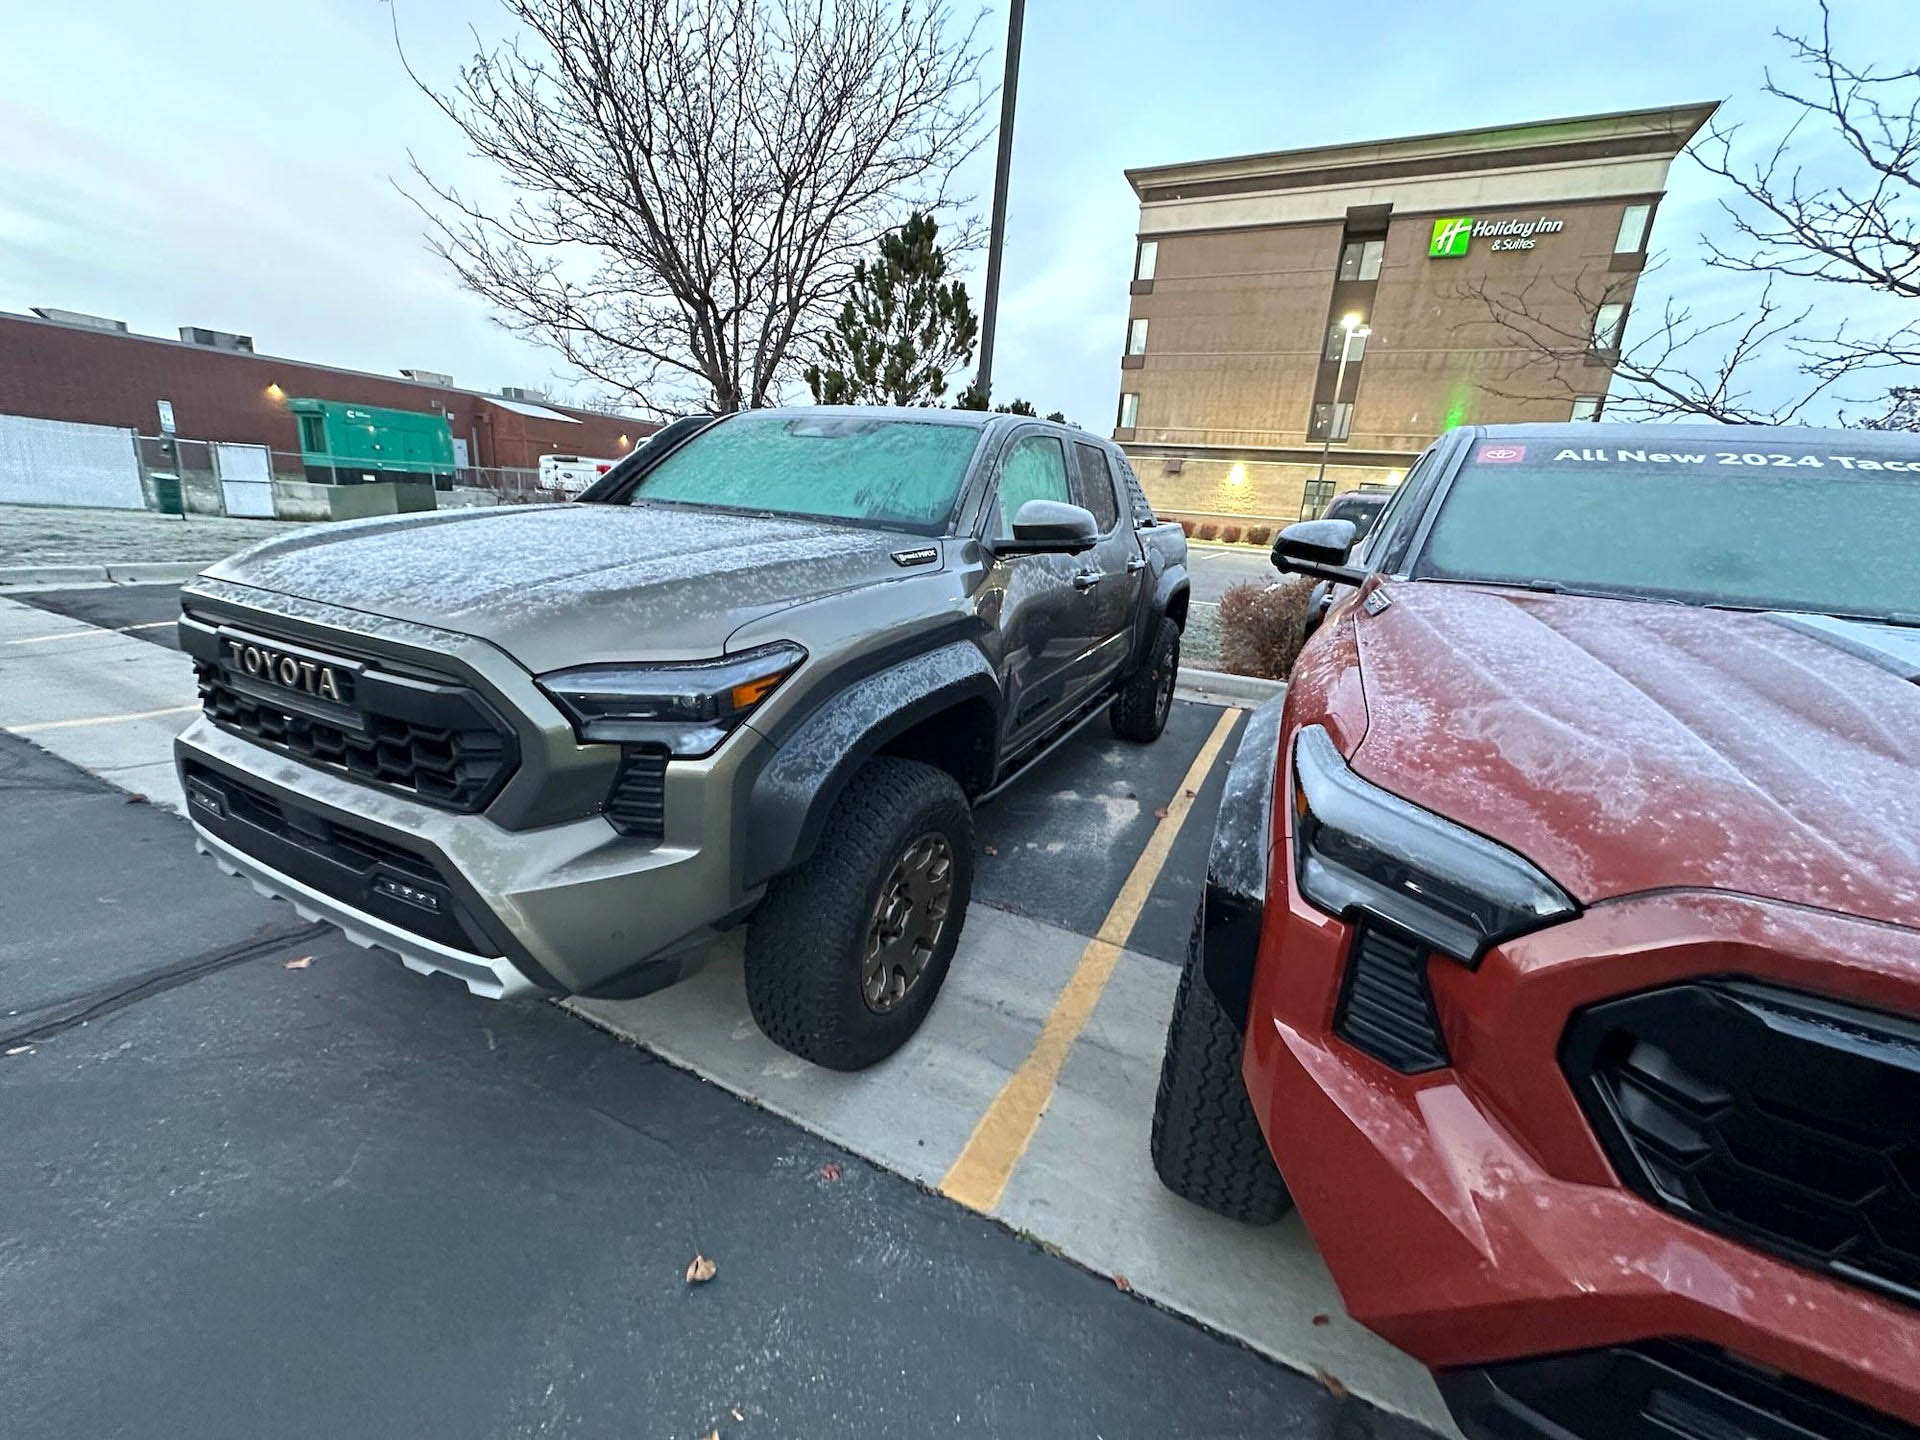 2024 Tacoma Official TERRA 2024 Tacoma Thread (4th Gen) 2024 Tacoma TRD Pro Terra and Trailhunter Bronze oxide side by side 9